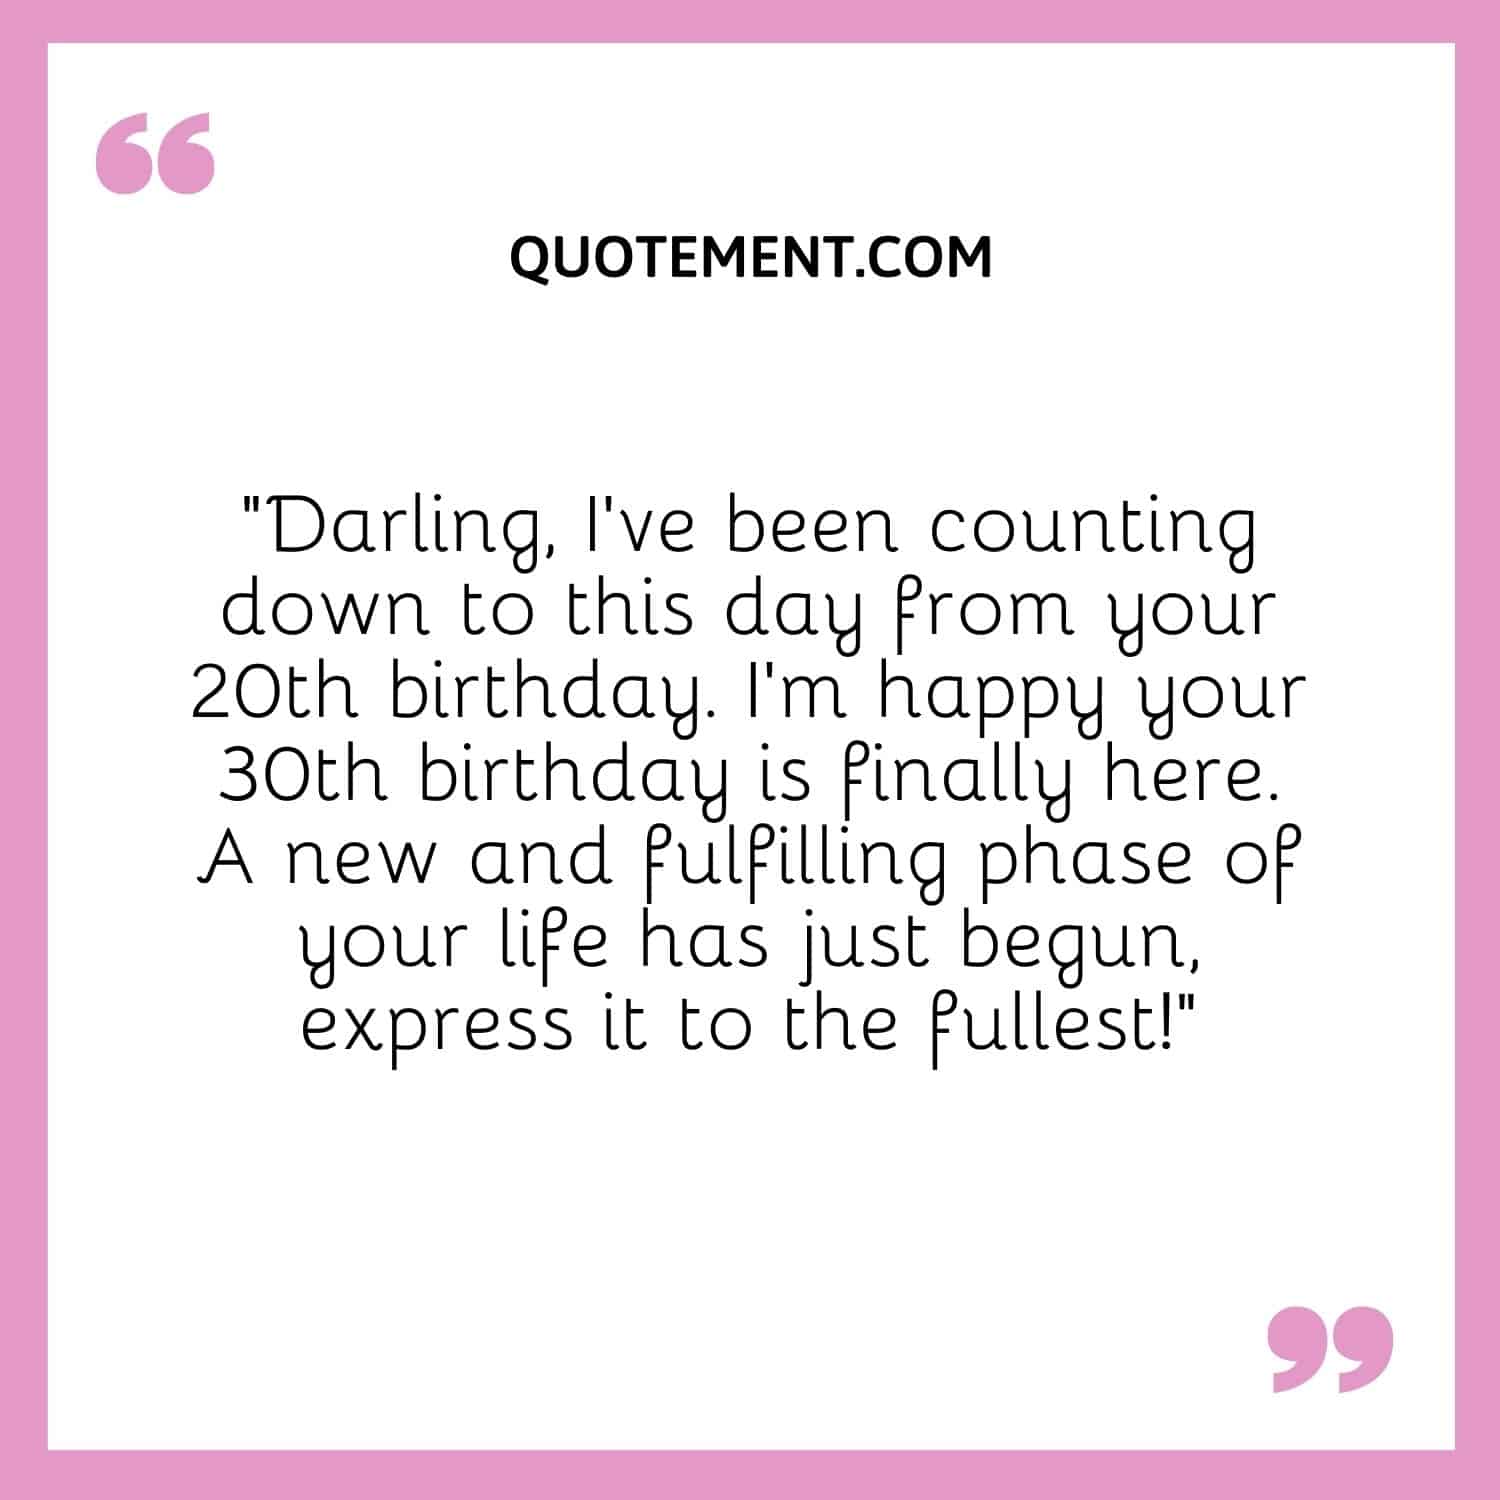 “Darling, I’ve been counting down to this day from your 20th birthday. I’m happy your 30th birthday is finally here. A new and fulfilling phase of your life has just begun, express it to the fullest!”